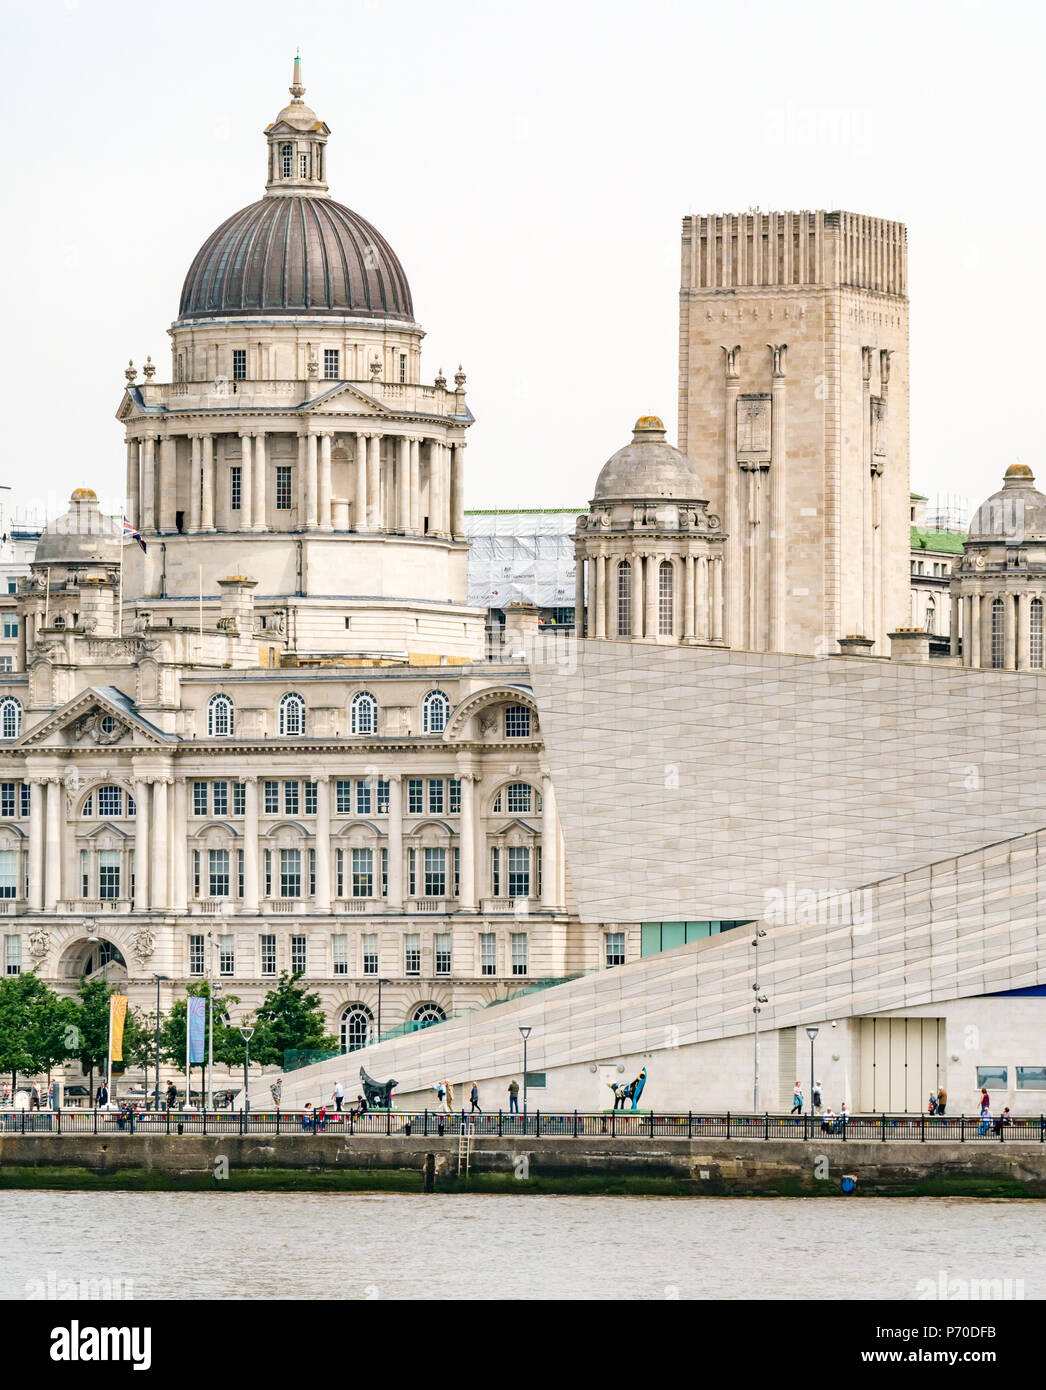 Edwardian baroque style Port of Liverpool building, one of Three Graces, with modern Museum of Liverpool, Pier Head, Liverpool, England, UK Stock Photo